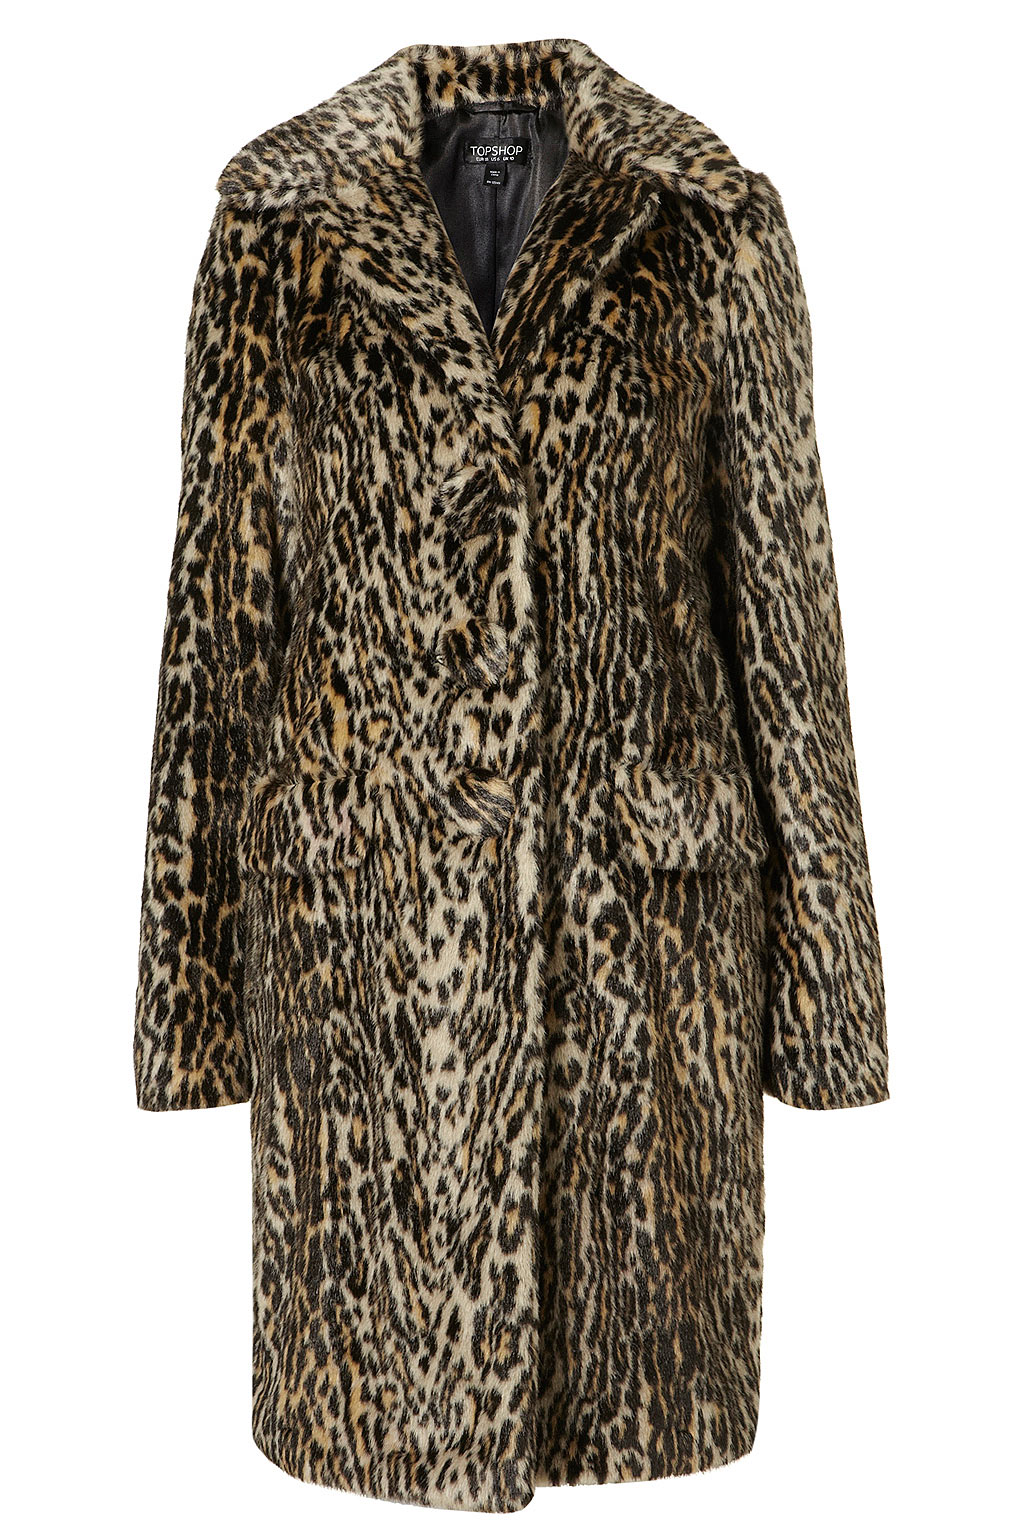 Caggie Dunlop faux fur leopard animal print jacket and turquoise ring ...